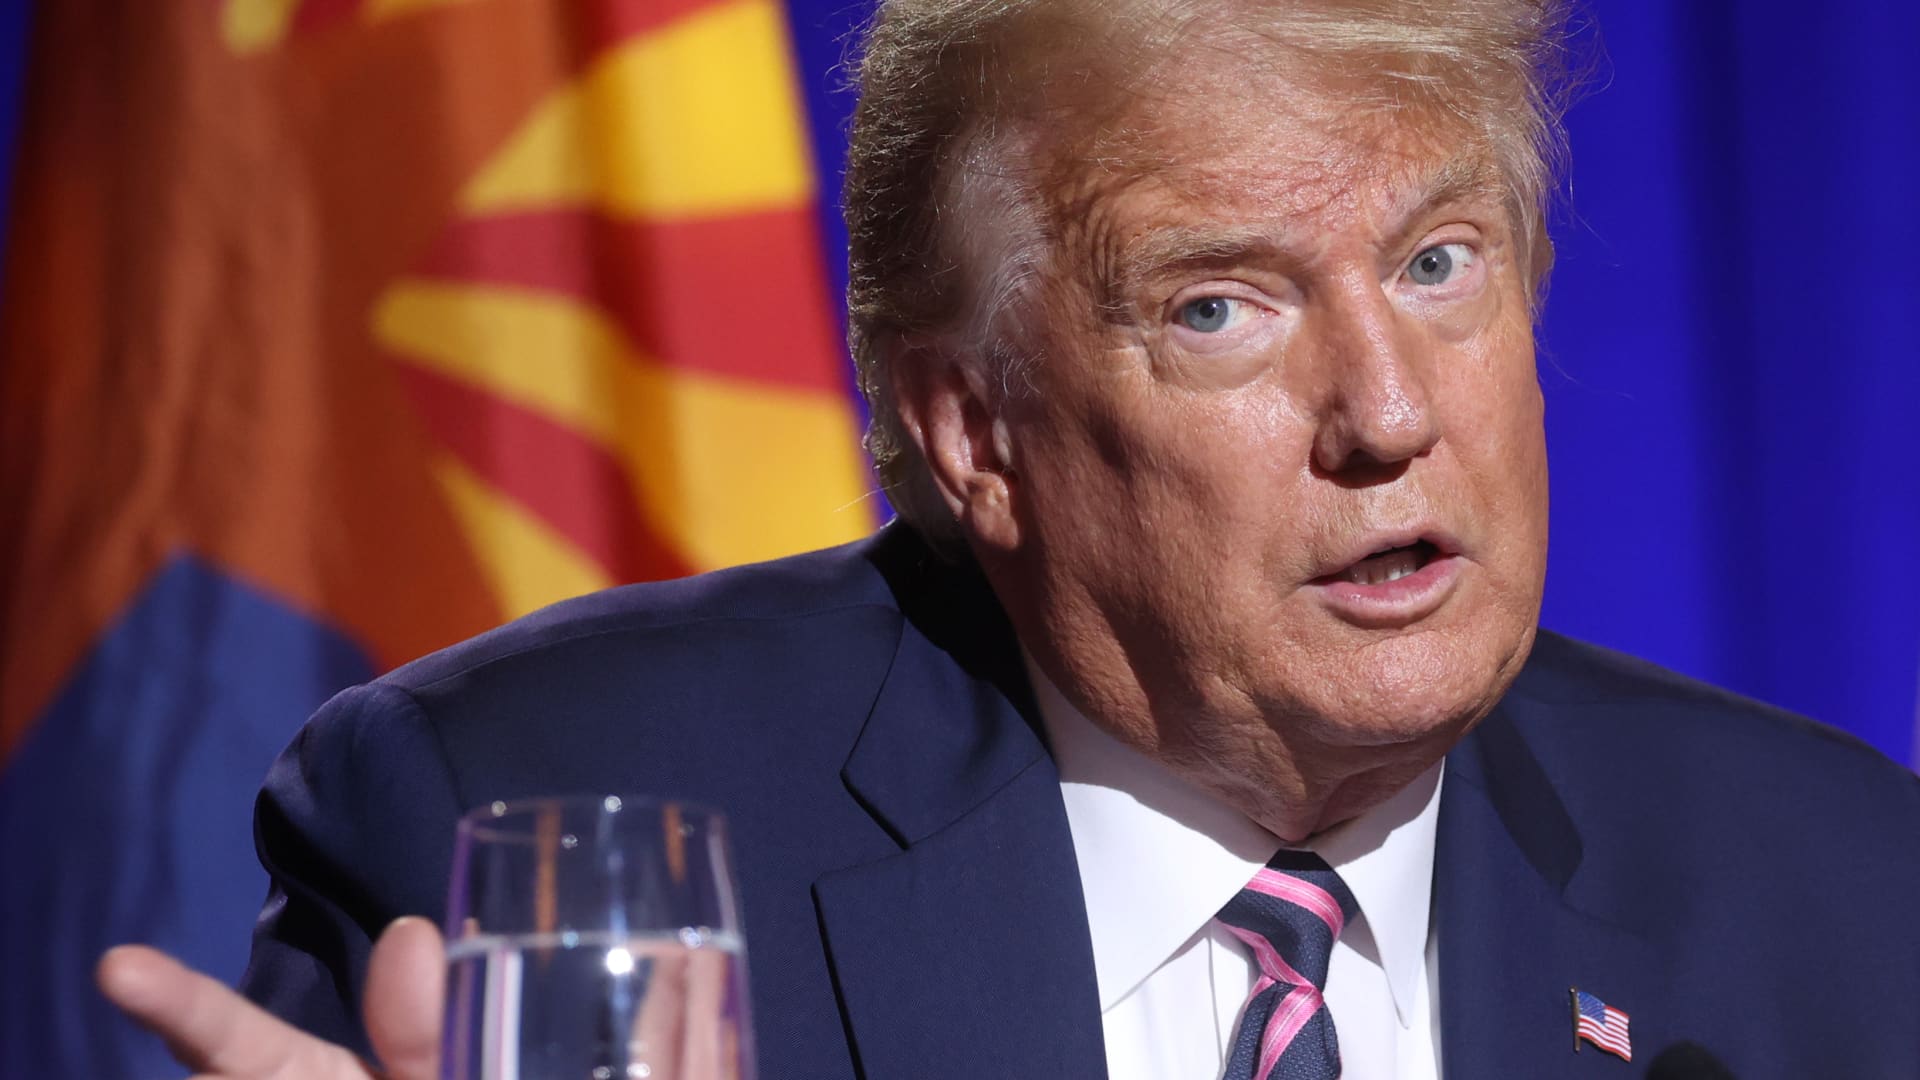 U.S. President Donald Trump speaks during a campaign event at the Arizona Grand Resort and Spa in Phoenix, Arizona U.S., September 14, 2020.